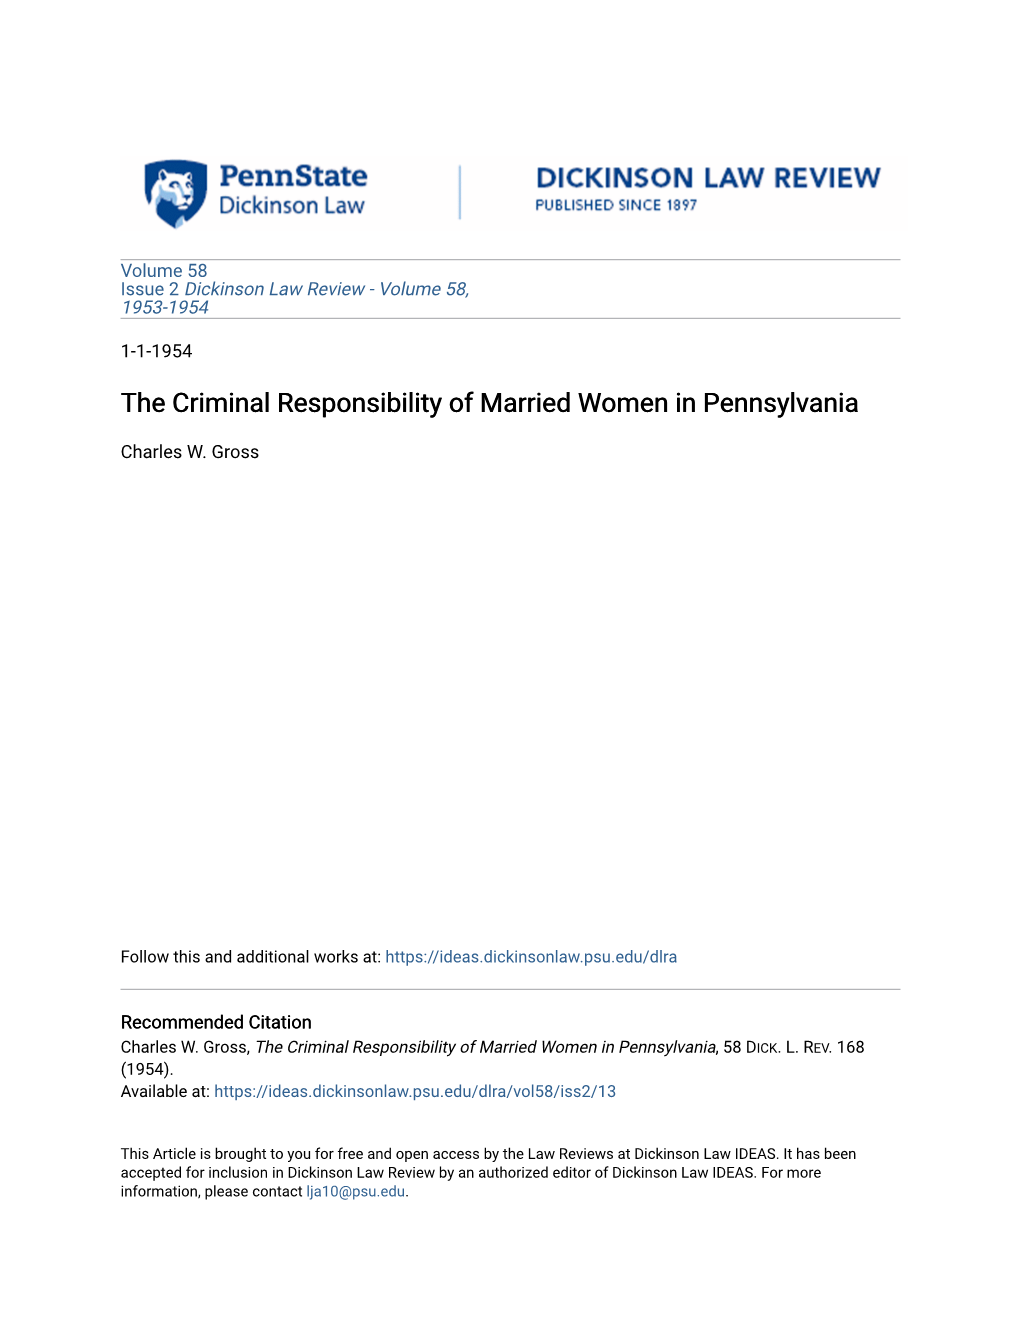 The Criminal Responsibility of Married Women in Pennsylvania